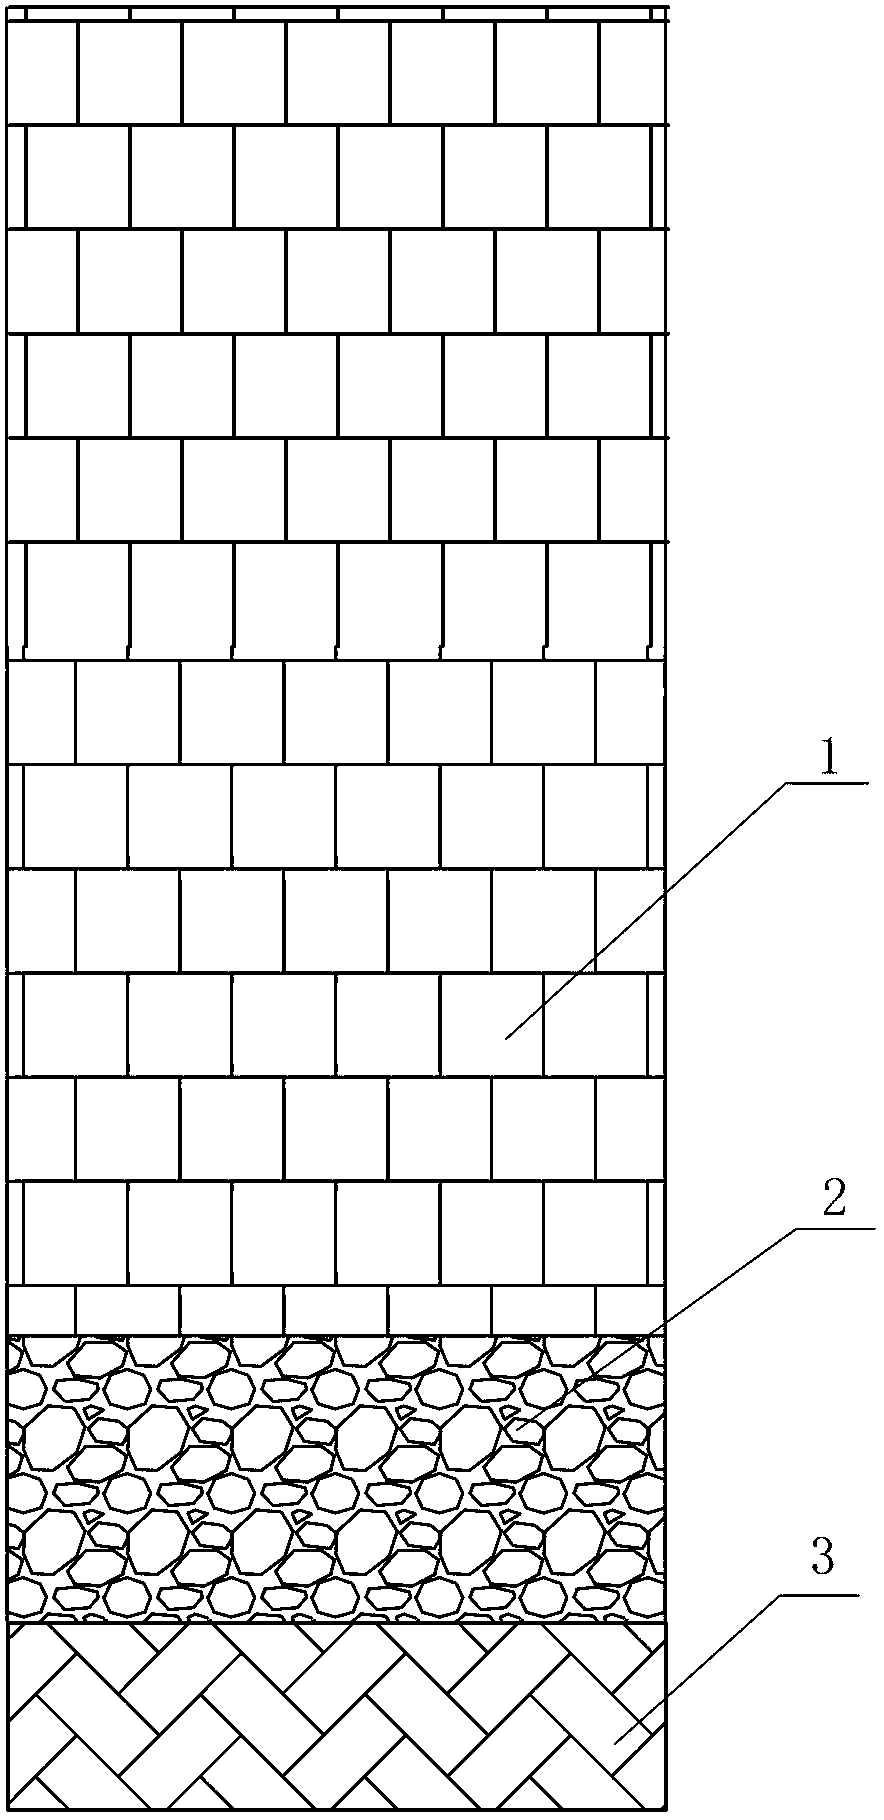 Construction method for processing ultra-thick quicksand layer of pile foundation by using front-end vibration steel casing